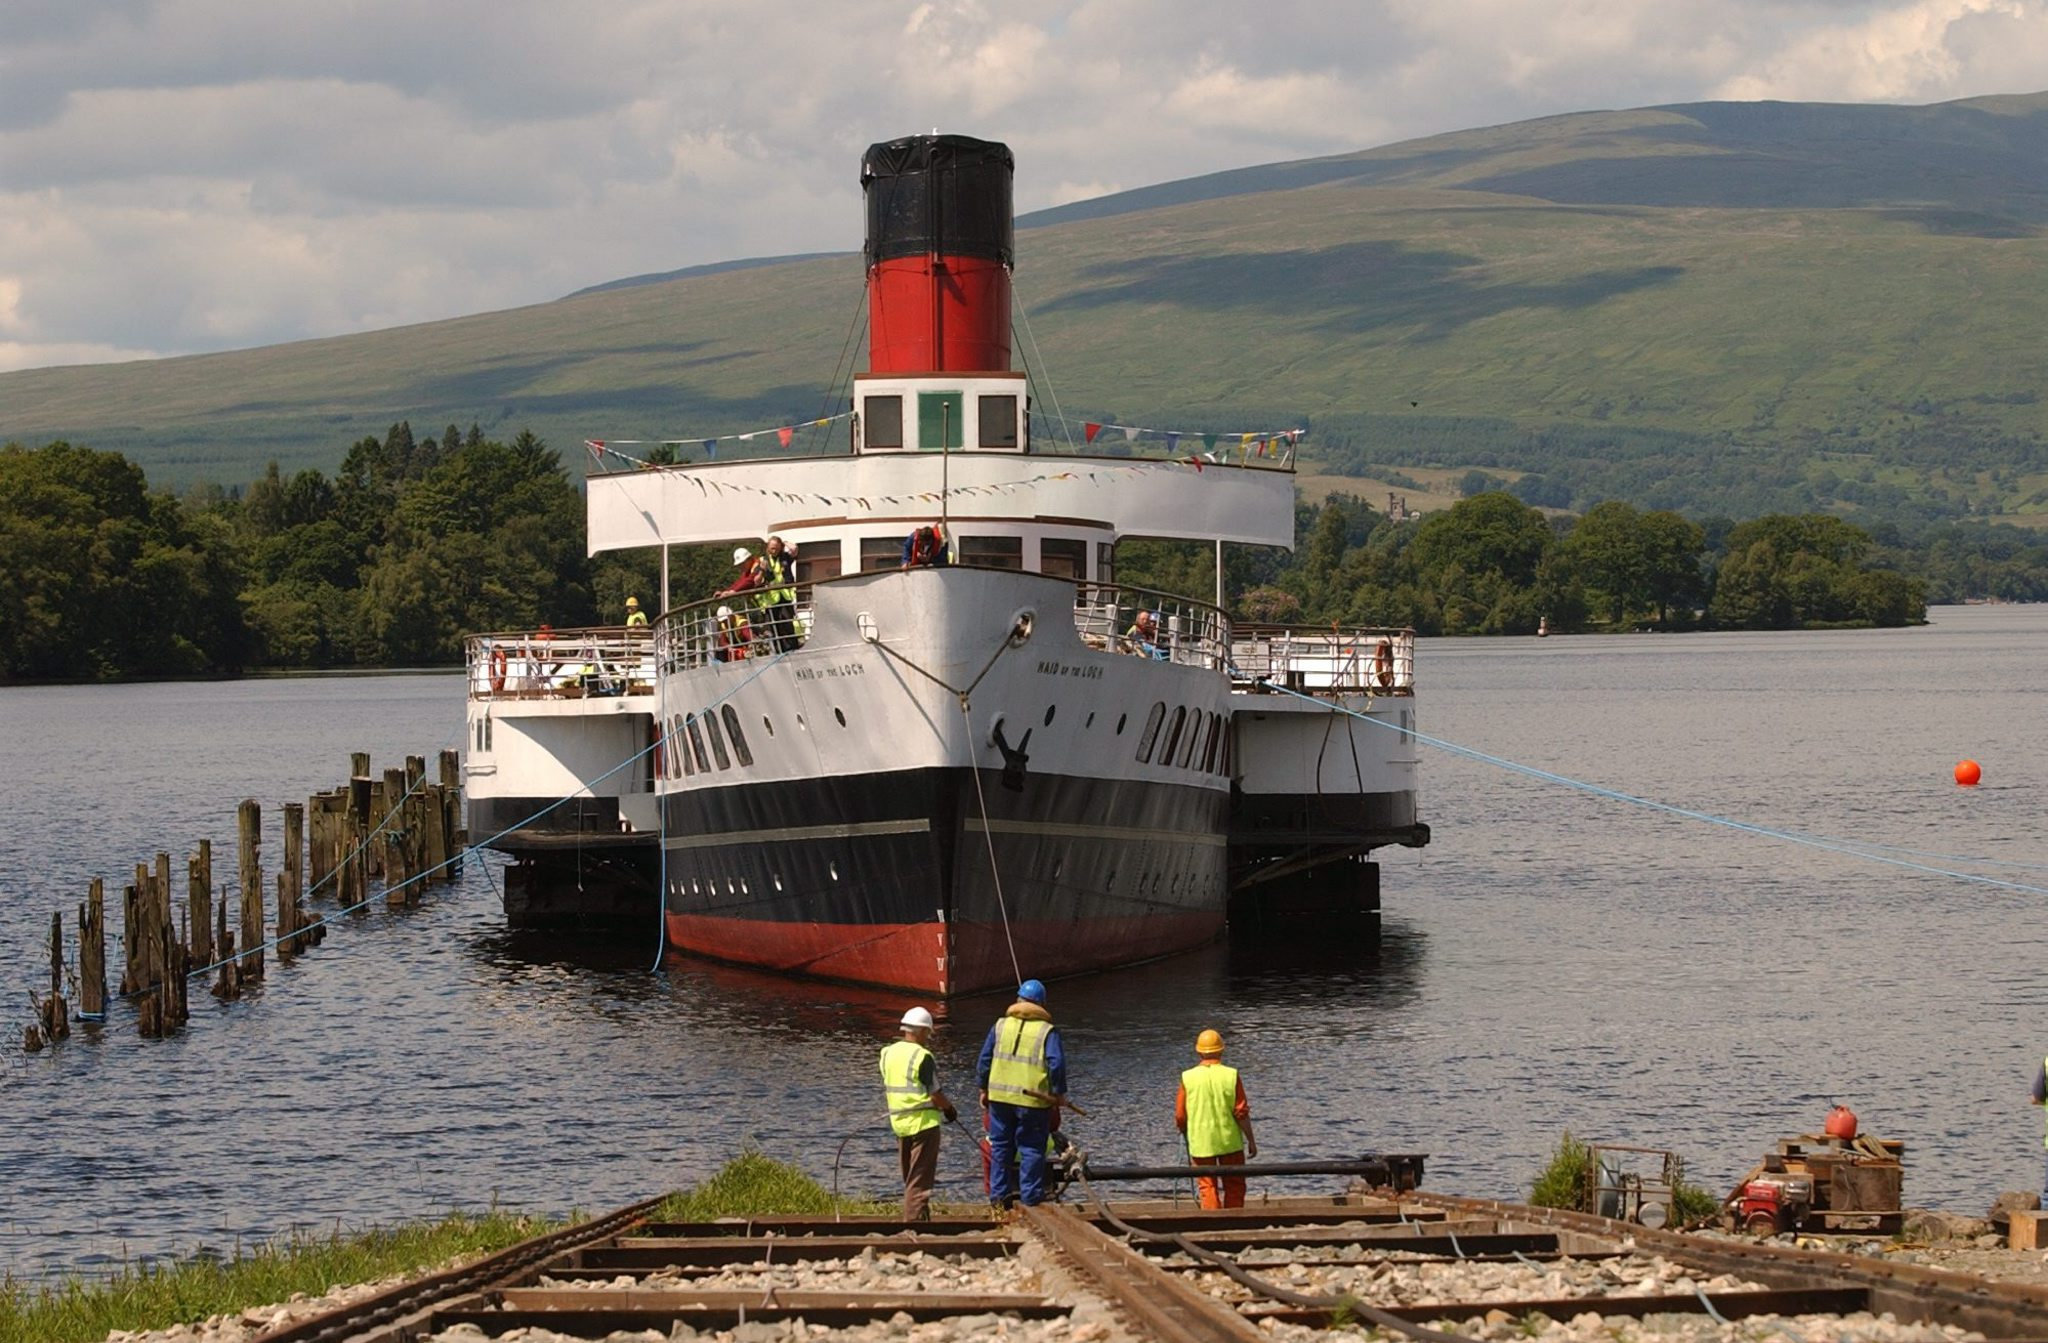 Maid of the Loch: Loch Lomond paddle steamer set for historic 'slipping'